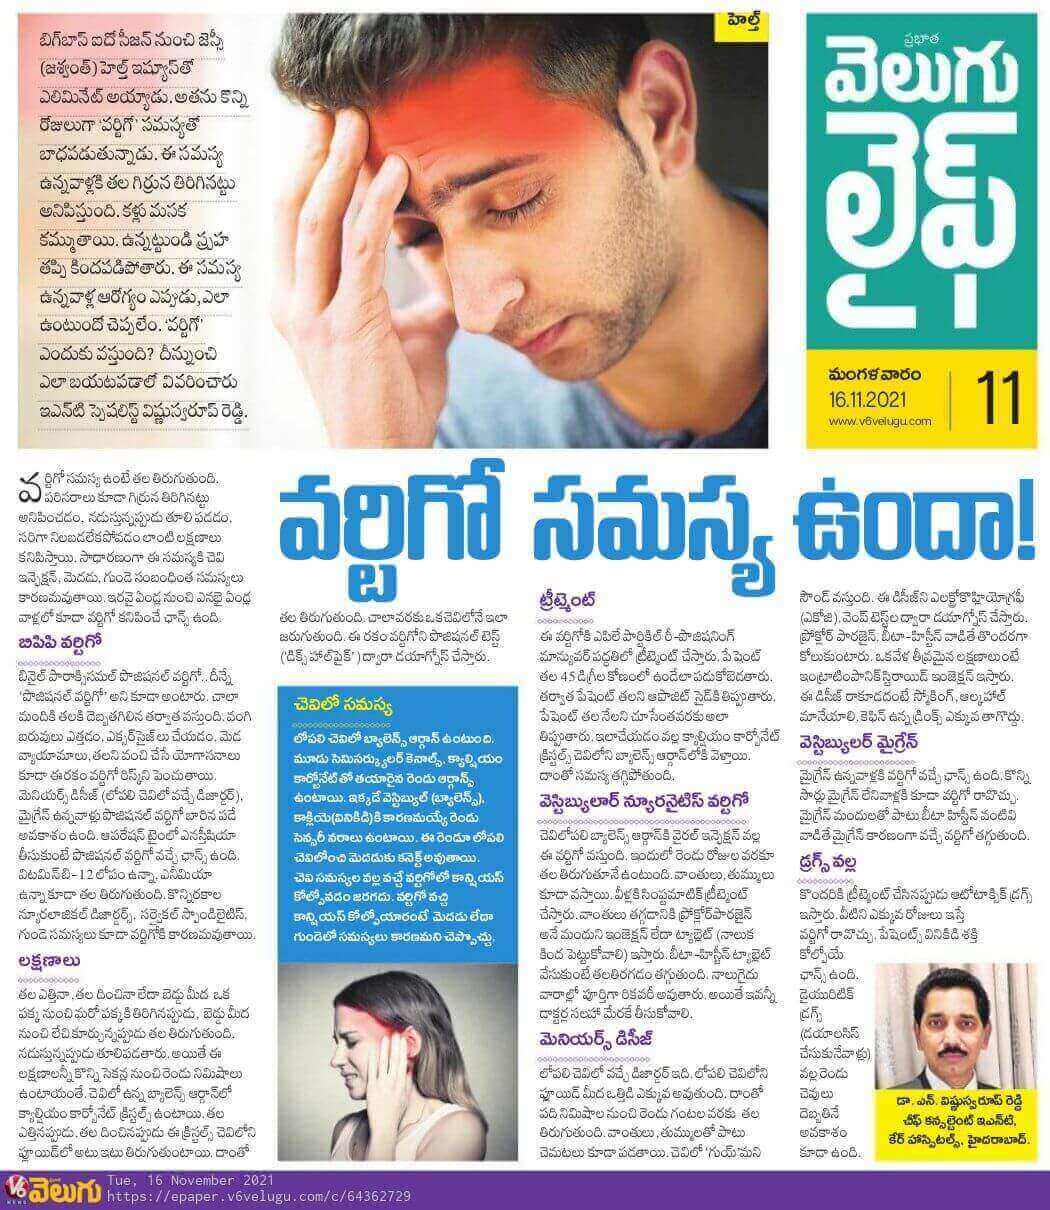 Article on Vertigo Problems by Dr. Vishnu Swaroop Reddy - Clinical Director Head of the Dept. & Chief Consultant ENT and Facial Plastic Surgeon